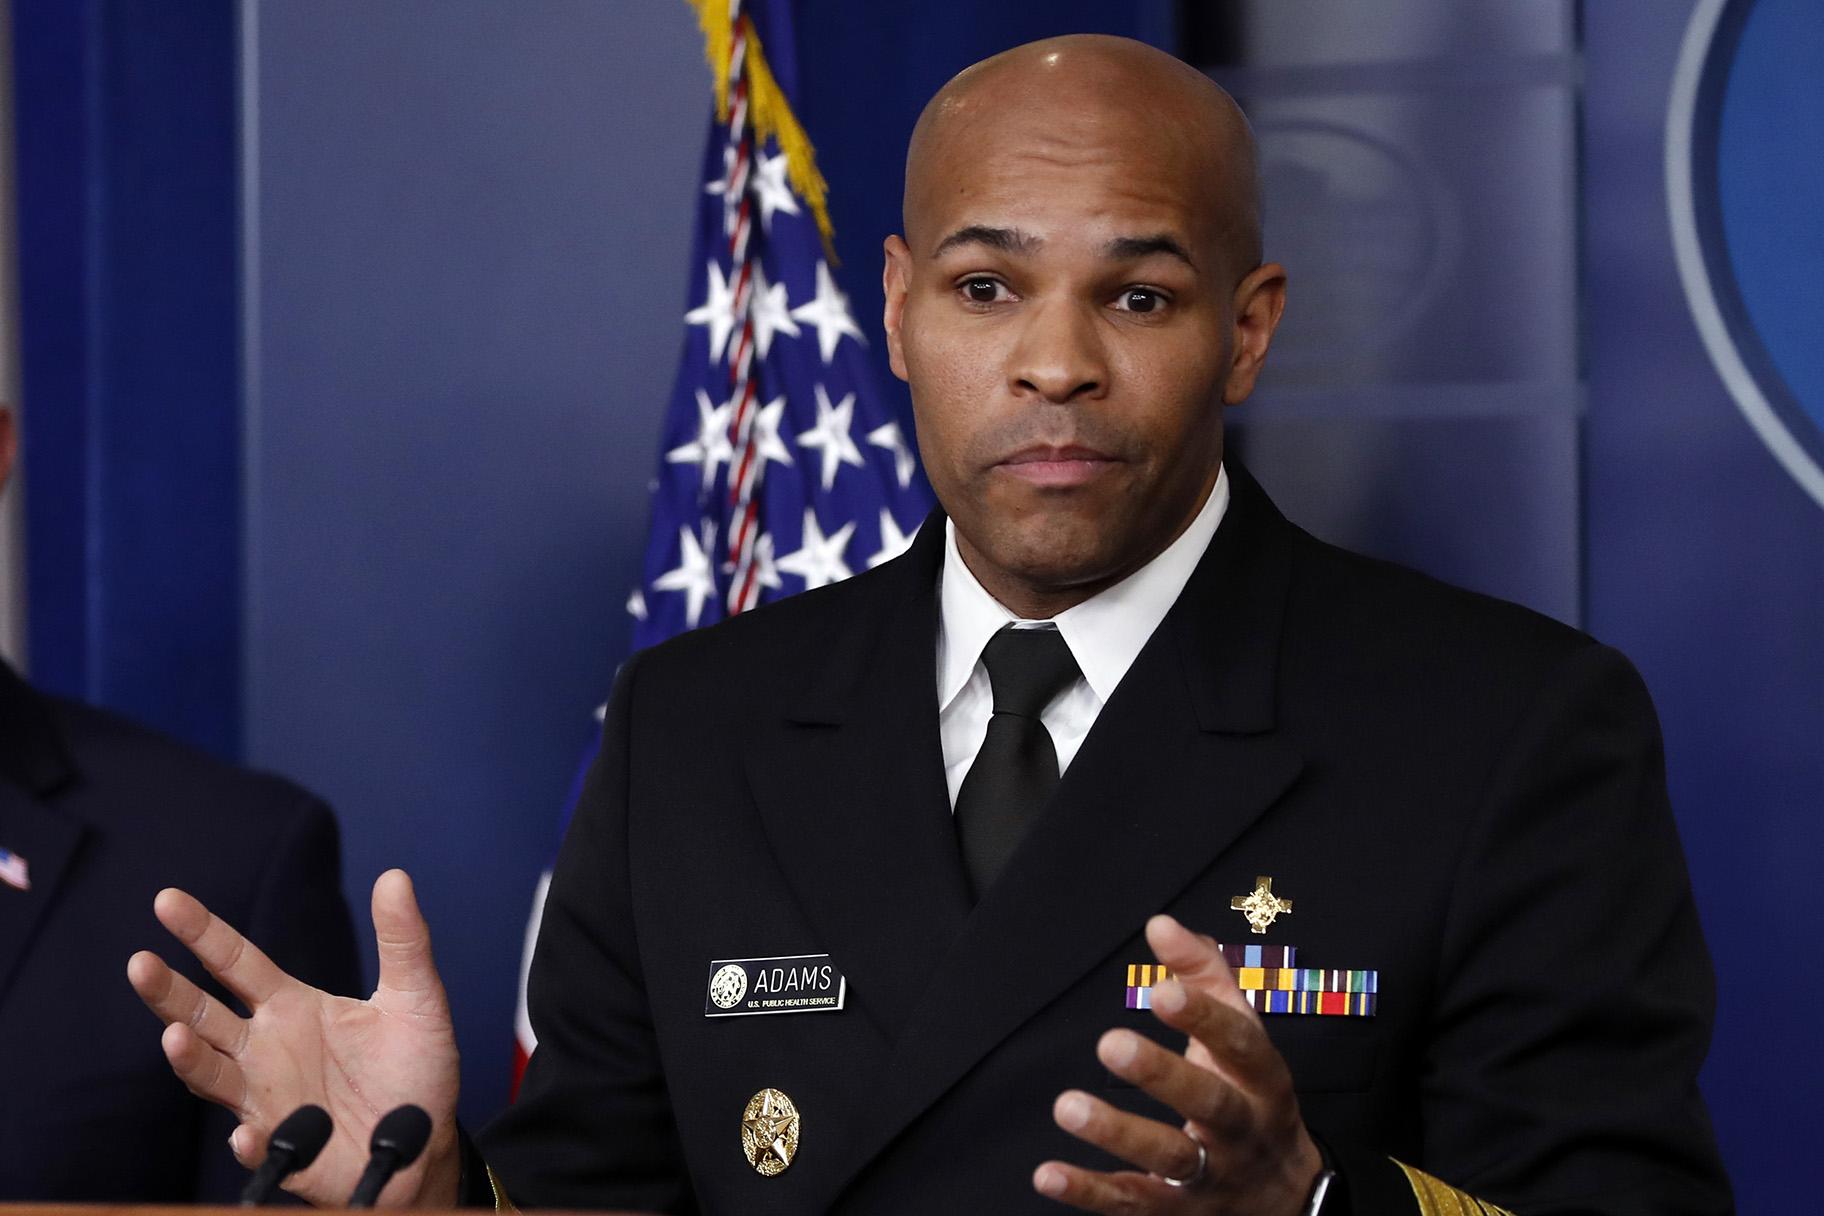 U.S. Surgeon General Jerome Adams speaks about the coronavirus in the James Brady Press Briefing Room of the White House, Friday, April 3, 2020, in Washington. (AP Photo / Alex Brandon)